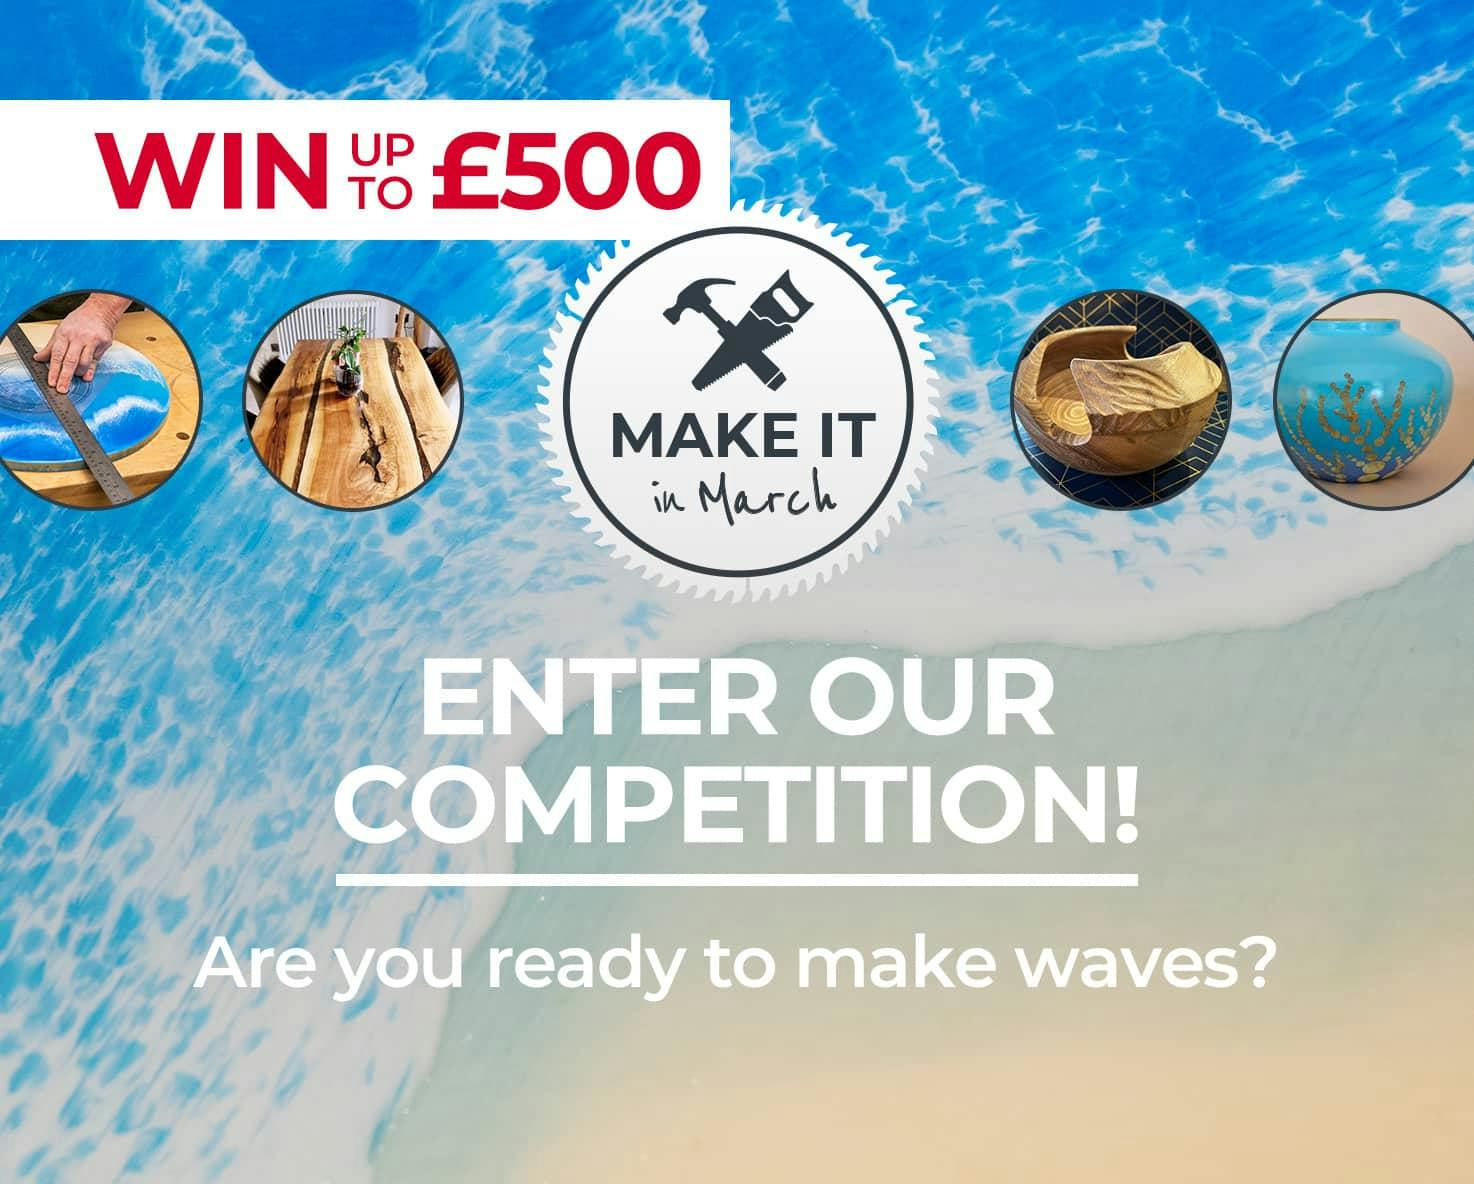 Win up to £500 - enter our Make it in March competition